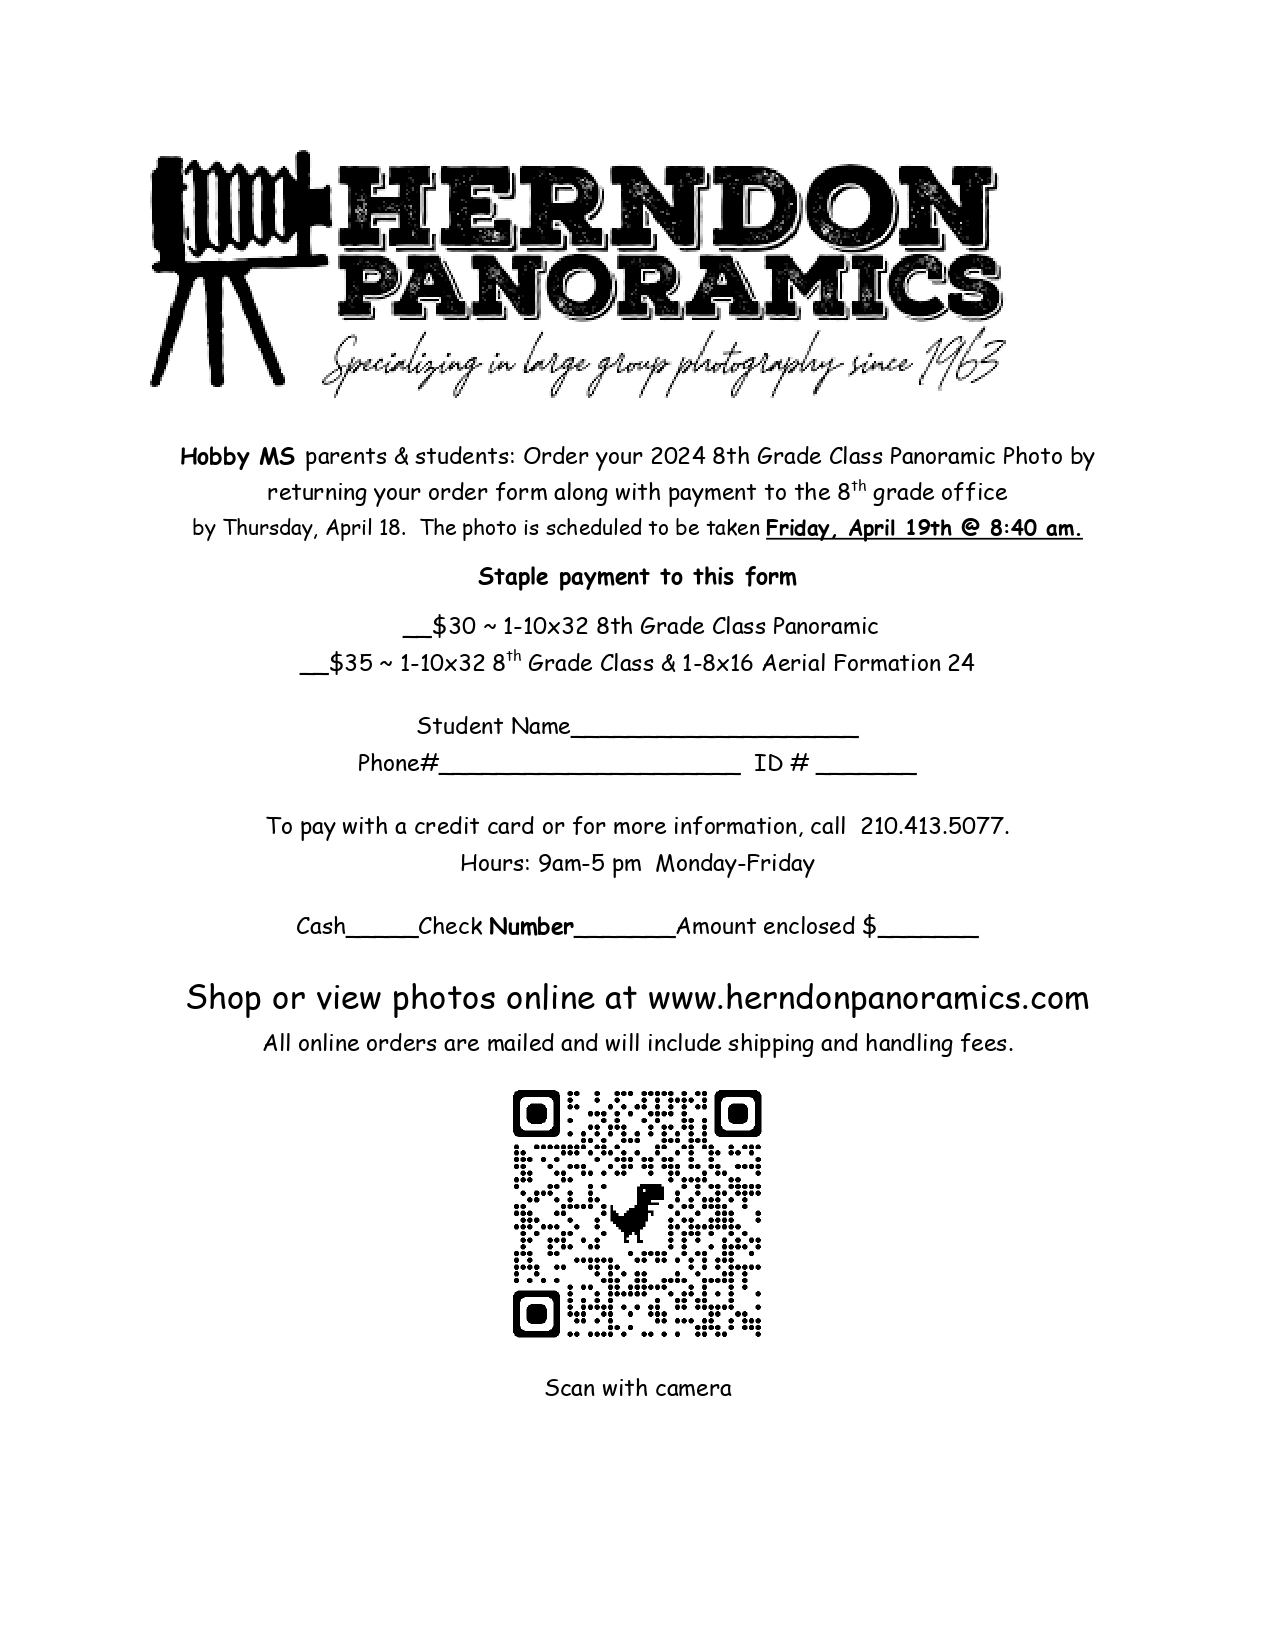 Flyer for henderson panoramics offering school photo services, featuring a qr code, details on pricing, and order instructions, with a decorative aerial formations silhouette at the top.